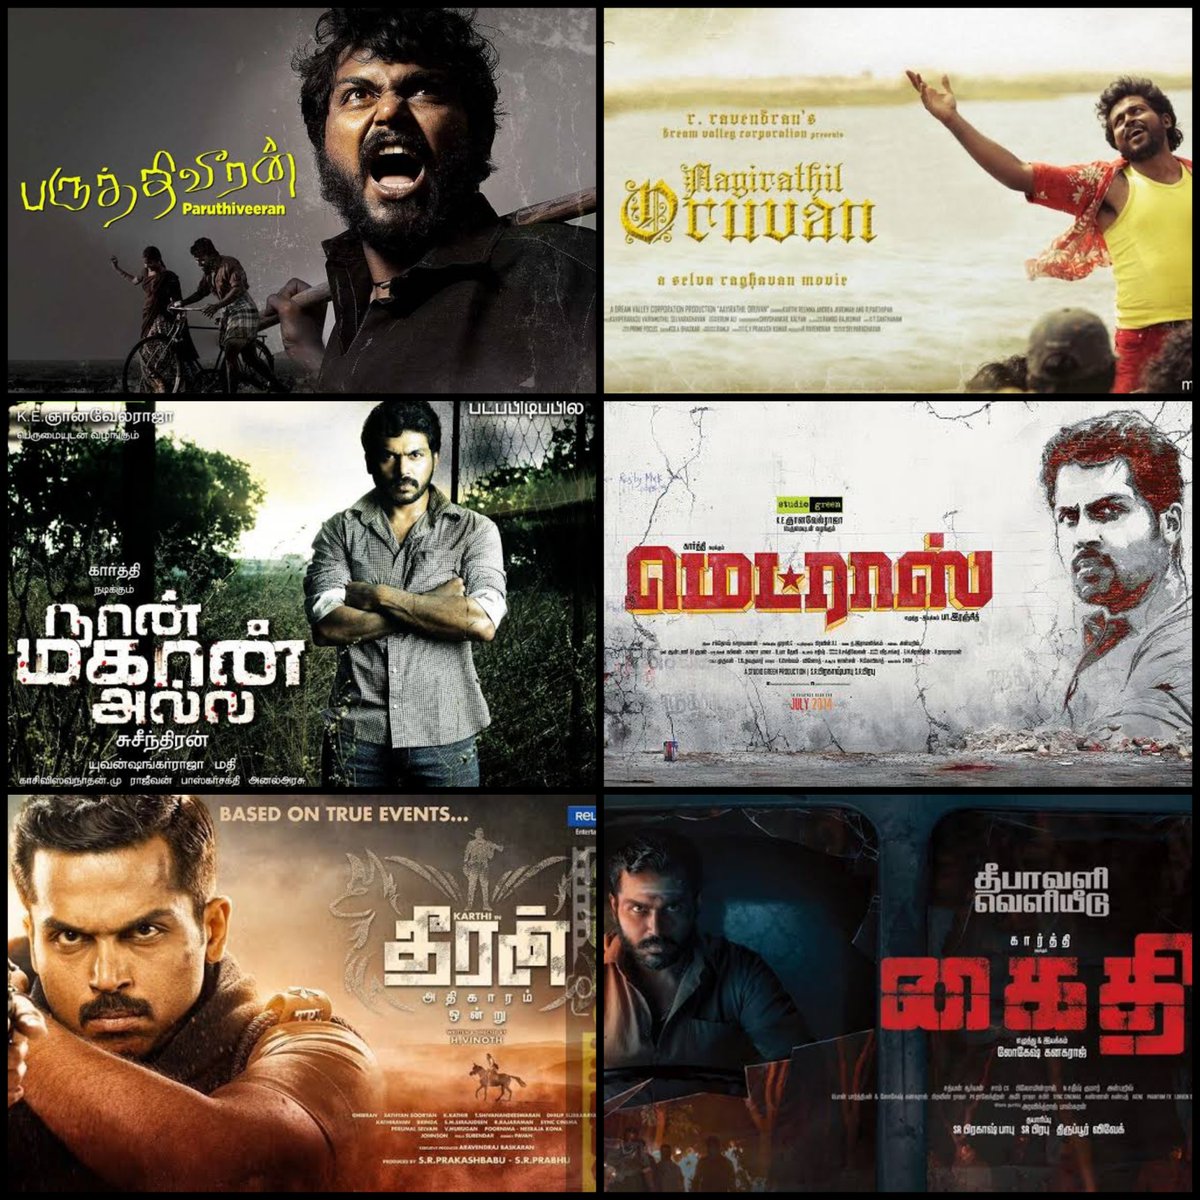 Best Of #Karthi - Your Favourite One Among These..??

#HBDKarthi